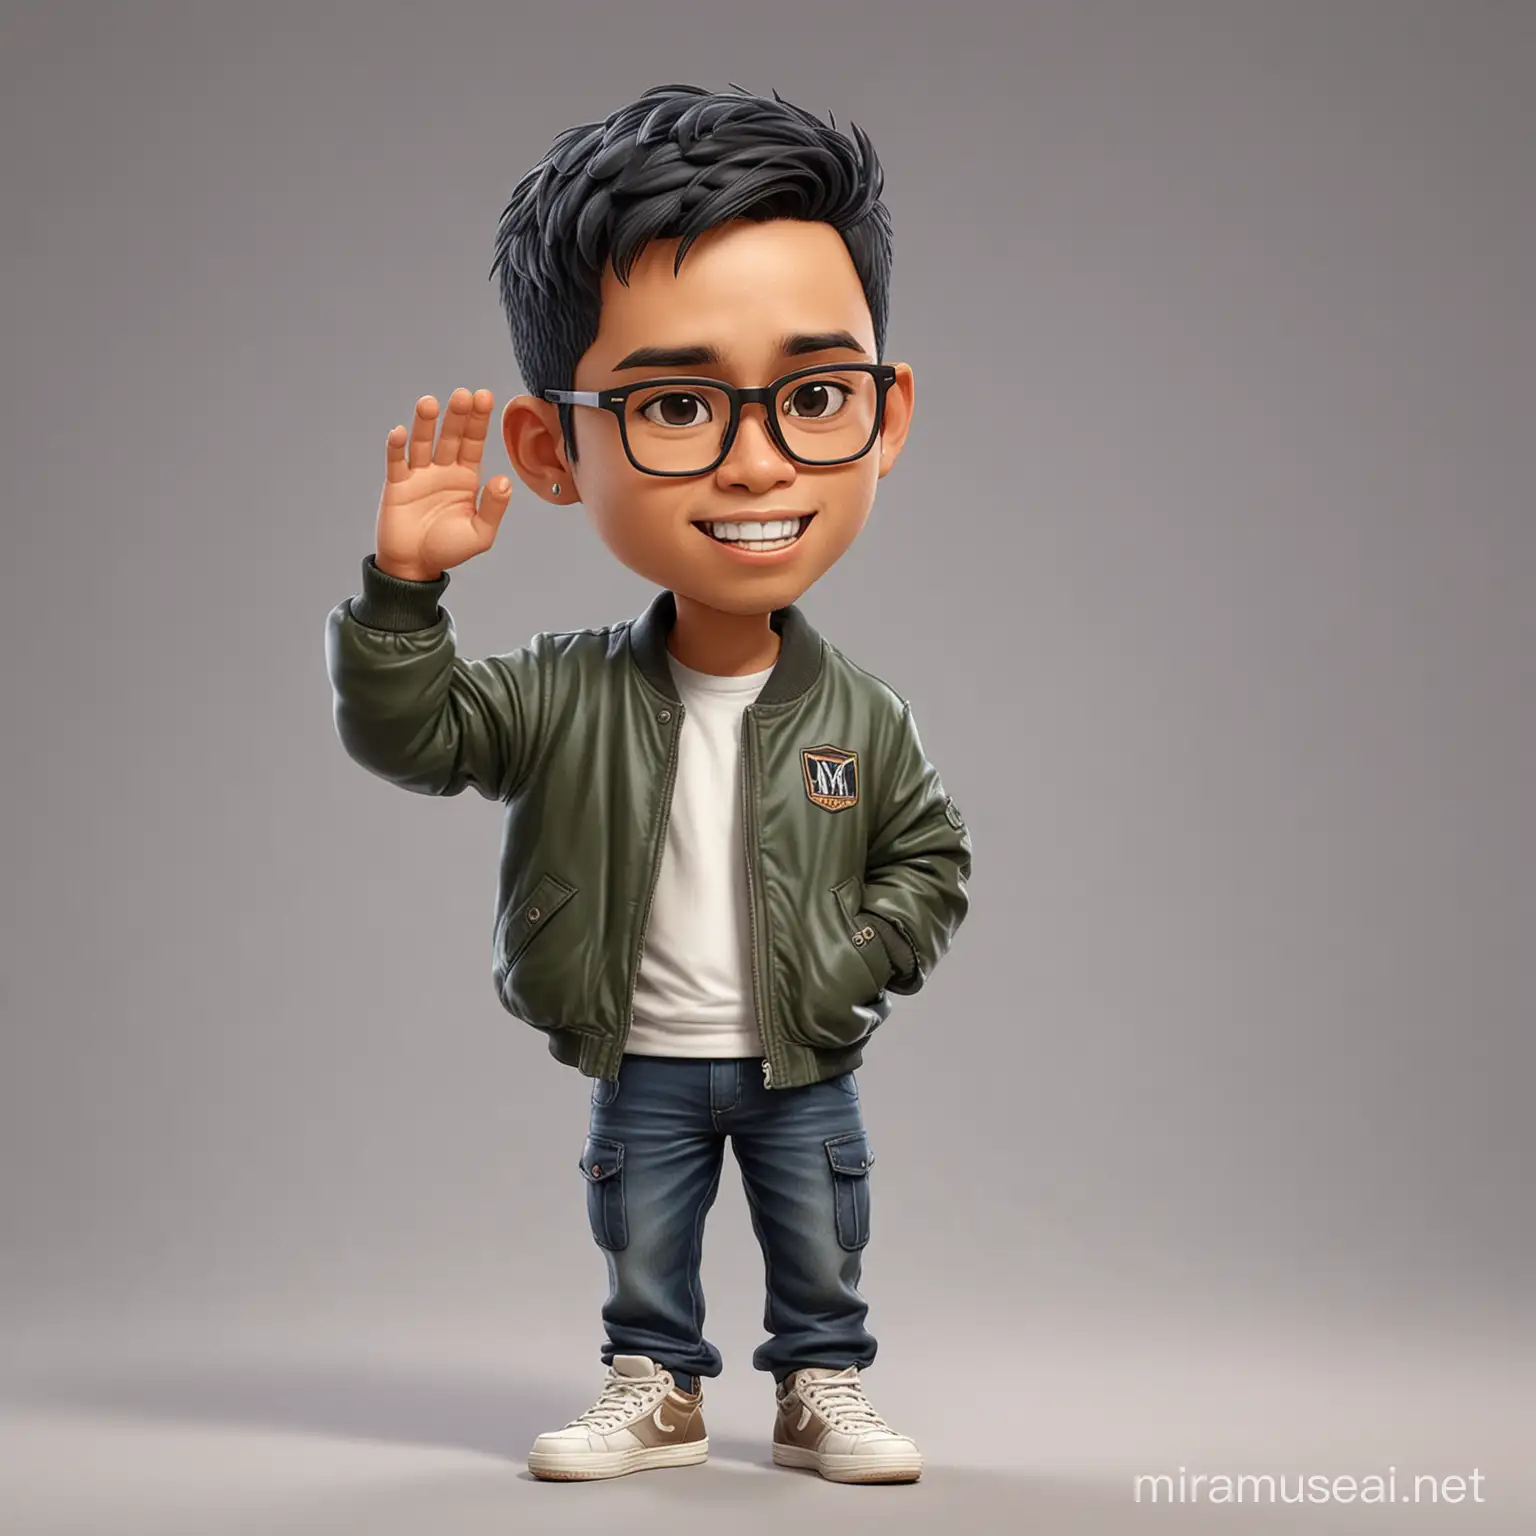 Chibi Caricature Portrait of a 29YearOld Indonesian Man in Varsity Jacket